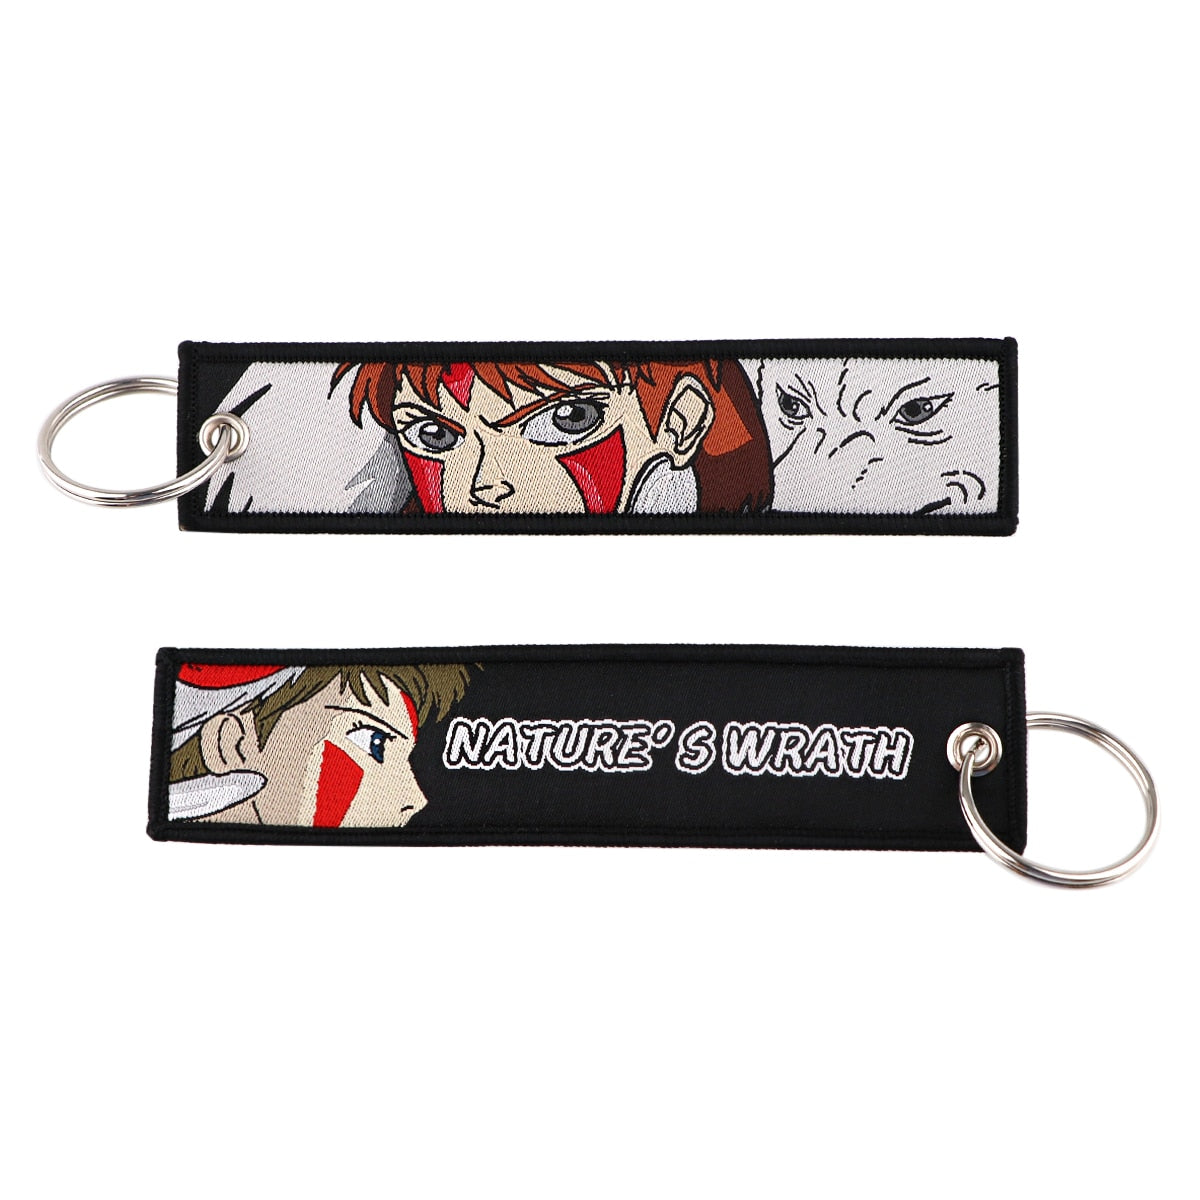 Anime Embroidery Keychain Key Ring 30